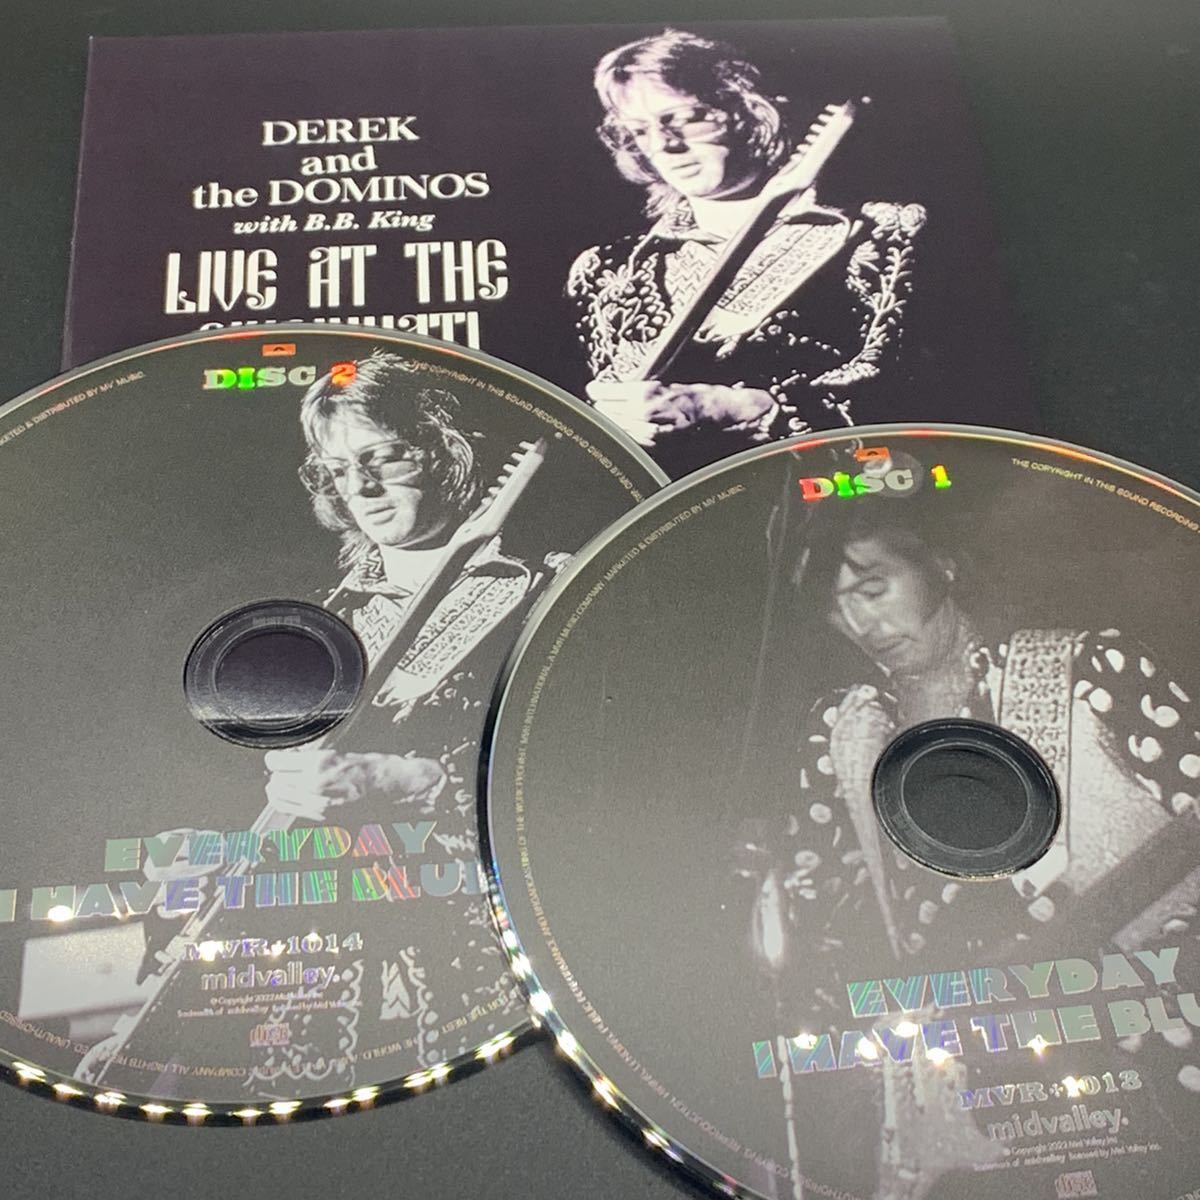 DEREK AND THE DOMINOS with B.B. KING : LIVE AT CINCINNATI 1970 マスターテープ使用 MID VALLEY RECORDS 世紀の共演！タイムセール！_画像5